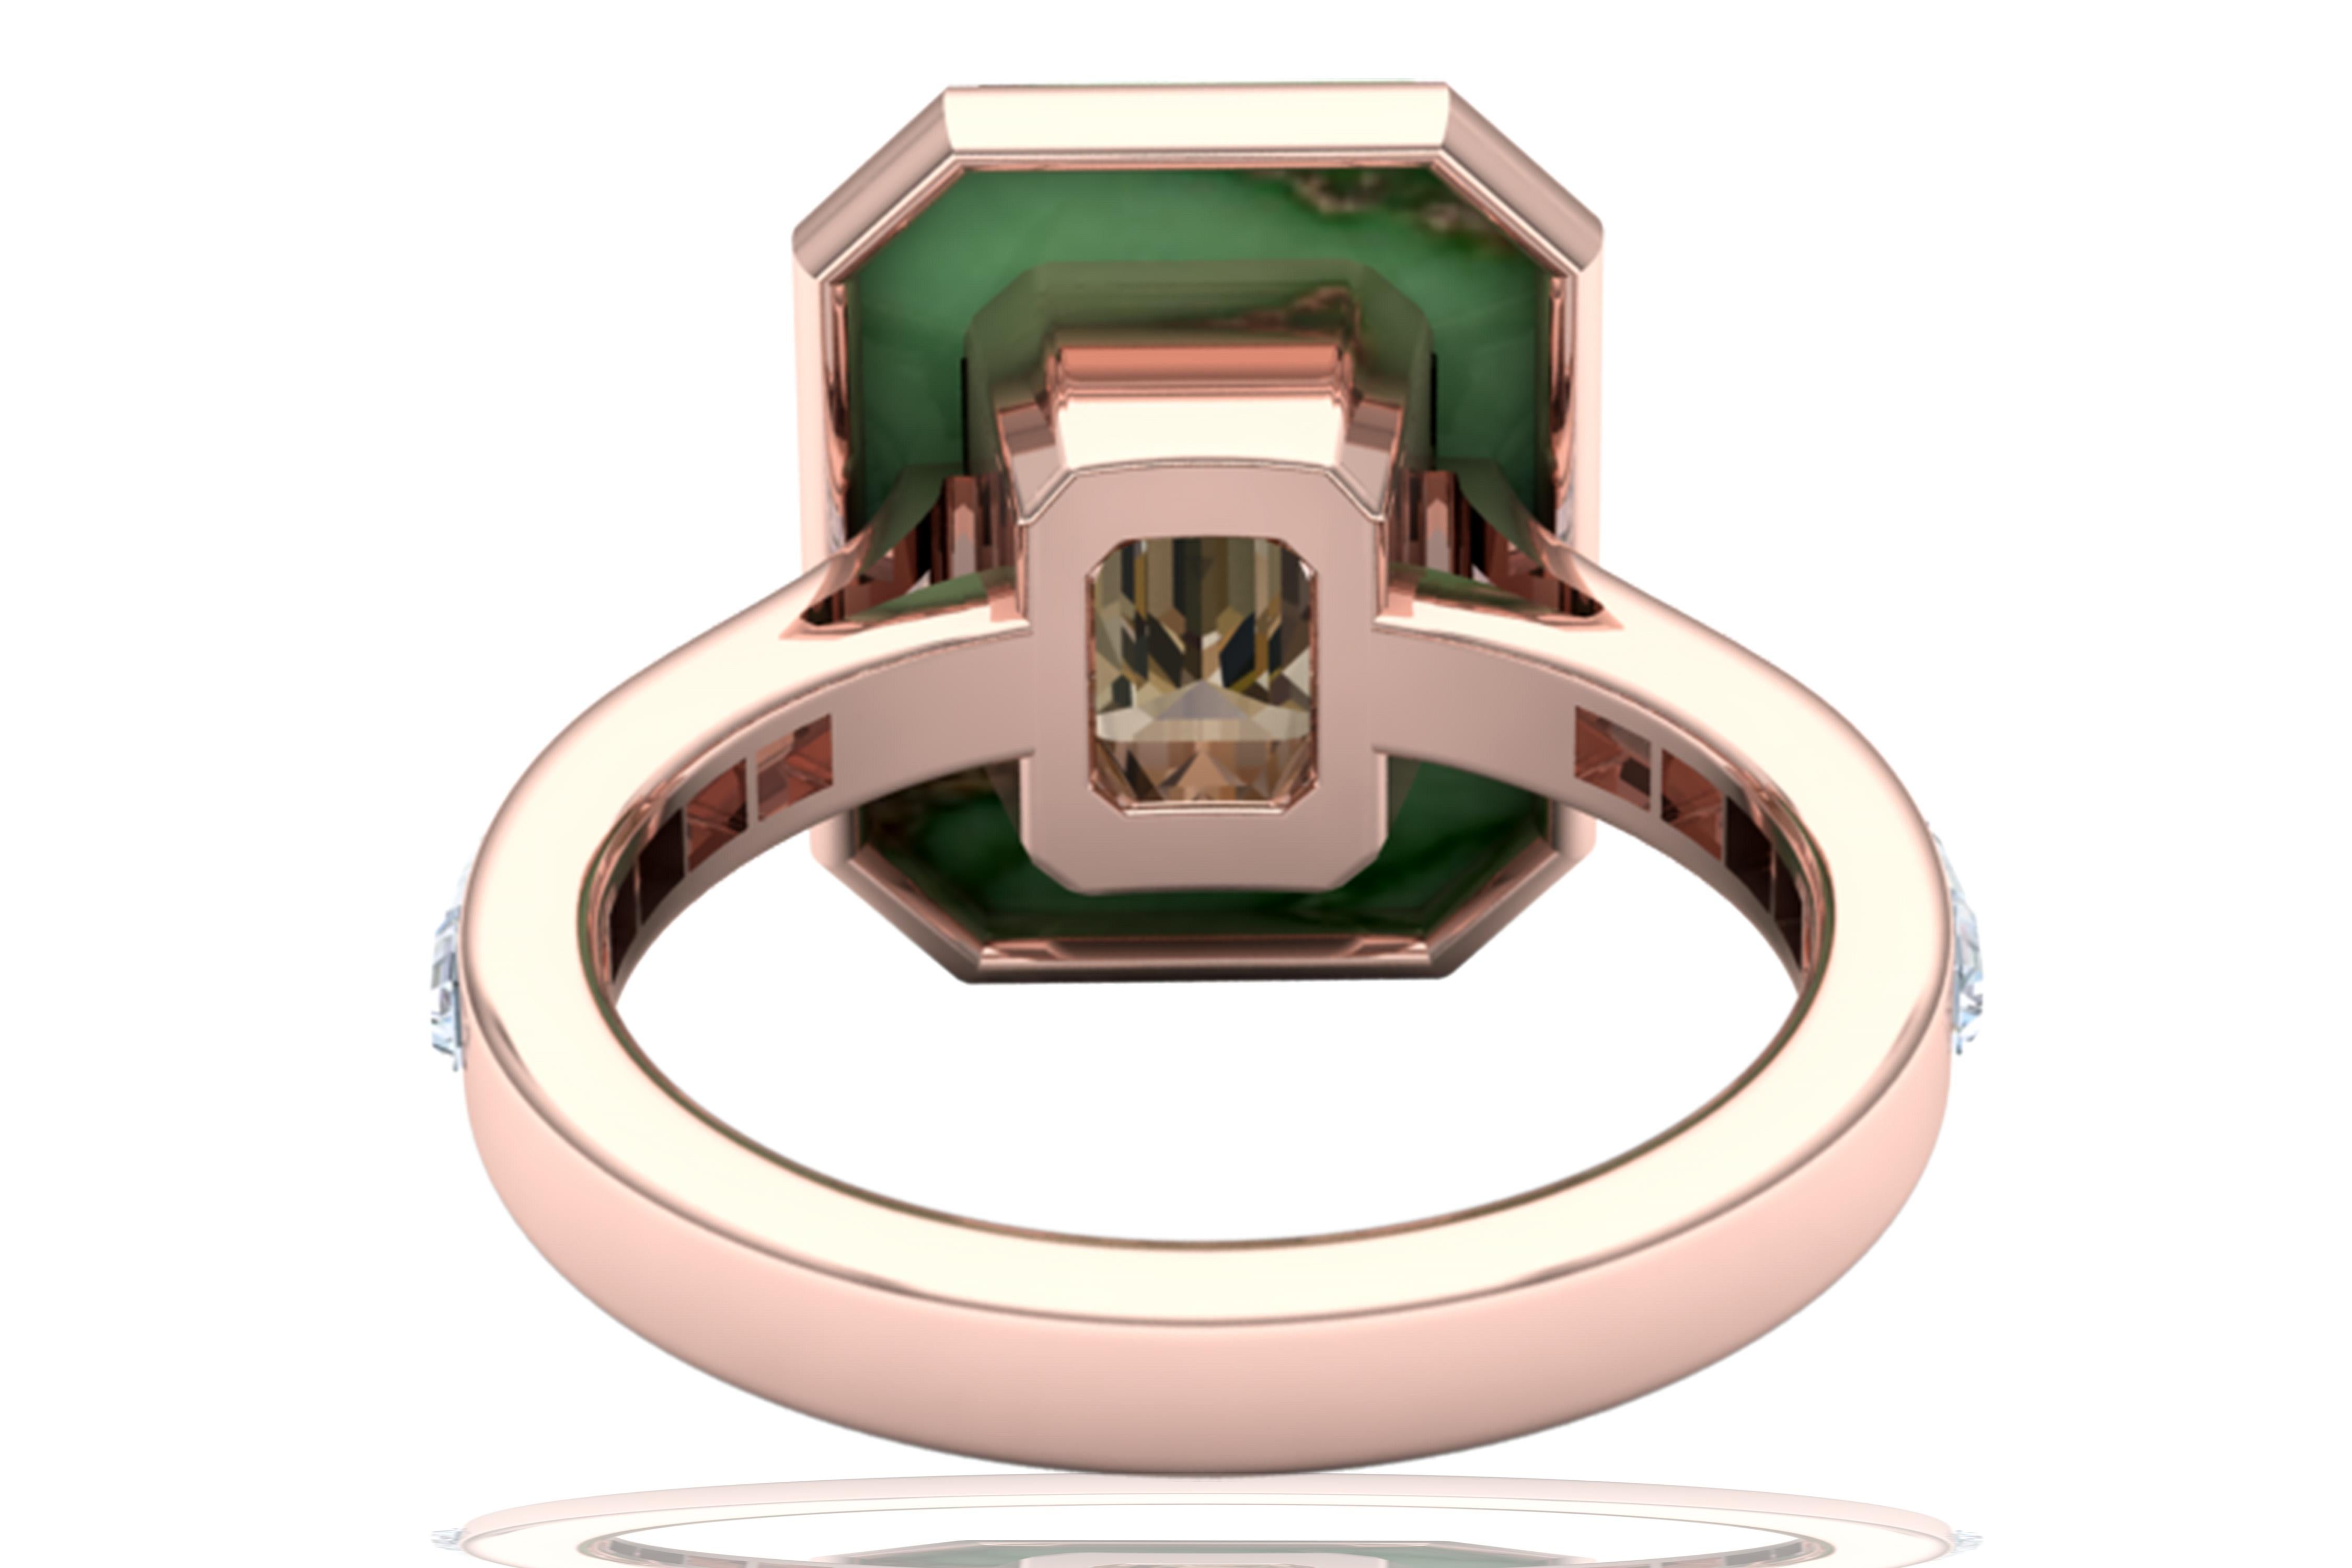 Stunningly beautiful, this center stone looks something like a diamond.  This rich cognac brown sapphire emerald cut makes this ring look like it belongs in a museum.  Being over 3 carats and cut to perfection, this brown sapphire radiates classic